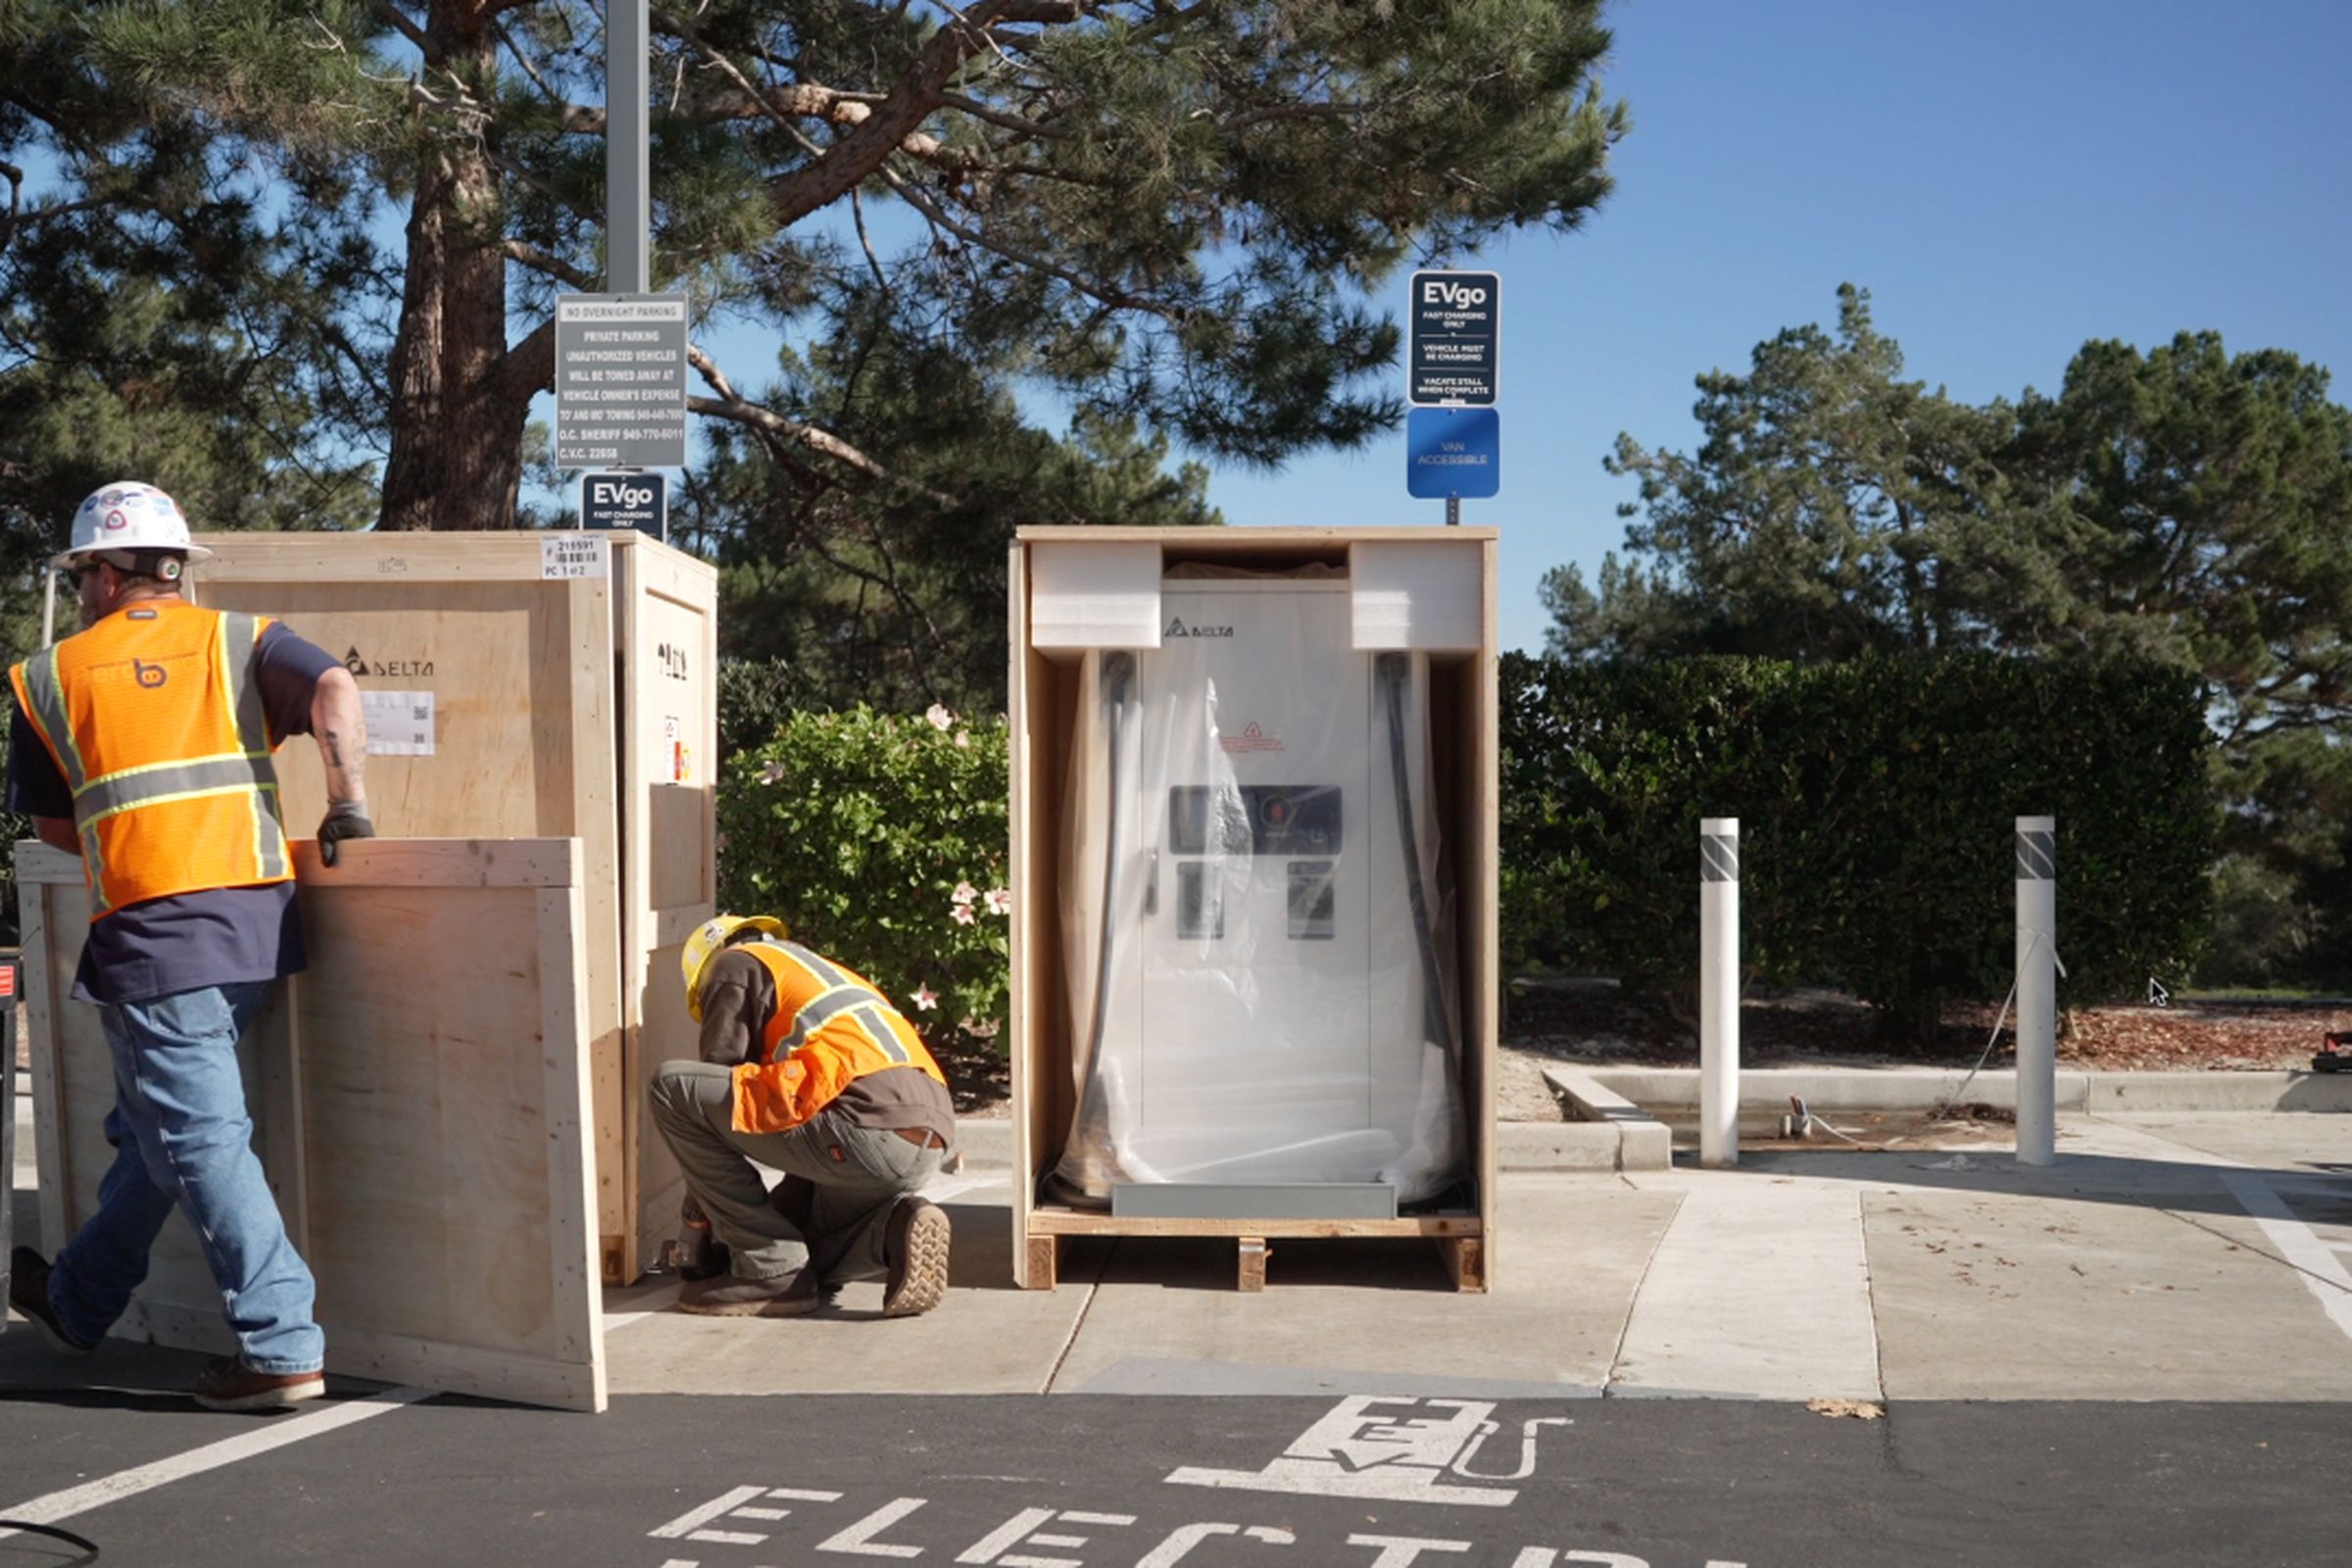 two workers in white hard hats and orange vests are opening large wooden crates in a parking lot in front of an EV charging spot. One crate reveals a charging station covered in plastic and foam protectors.